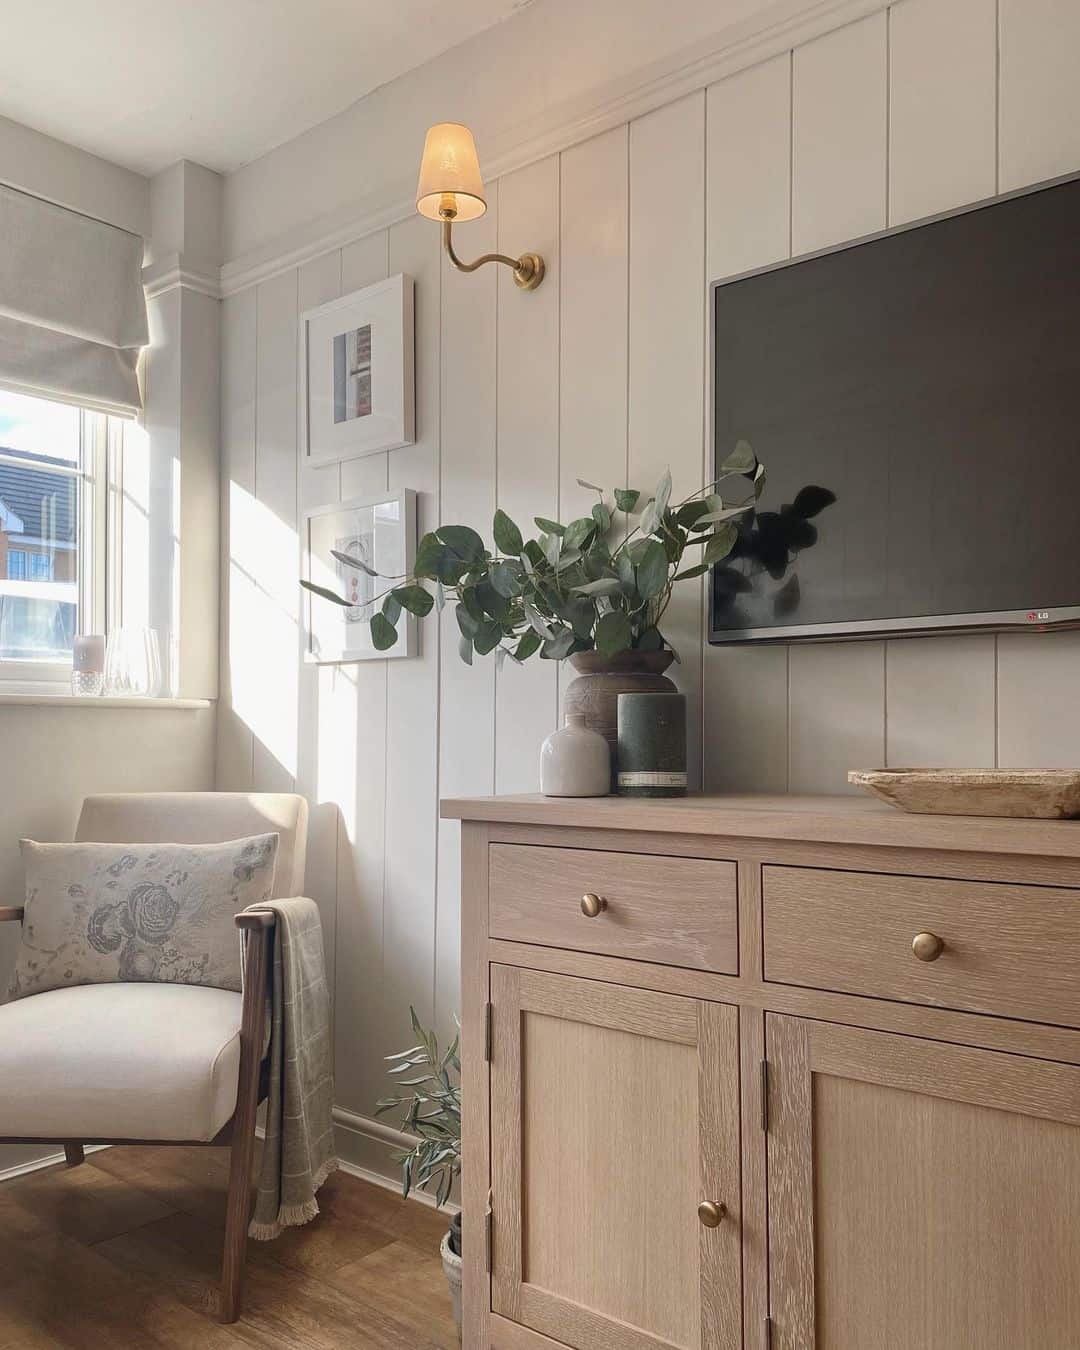 Paneling, Sconces, and Eucalyptus Accents